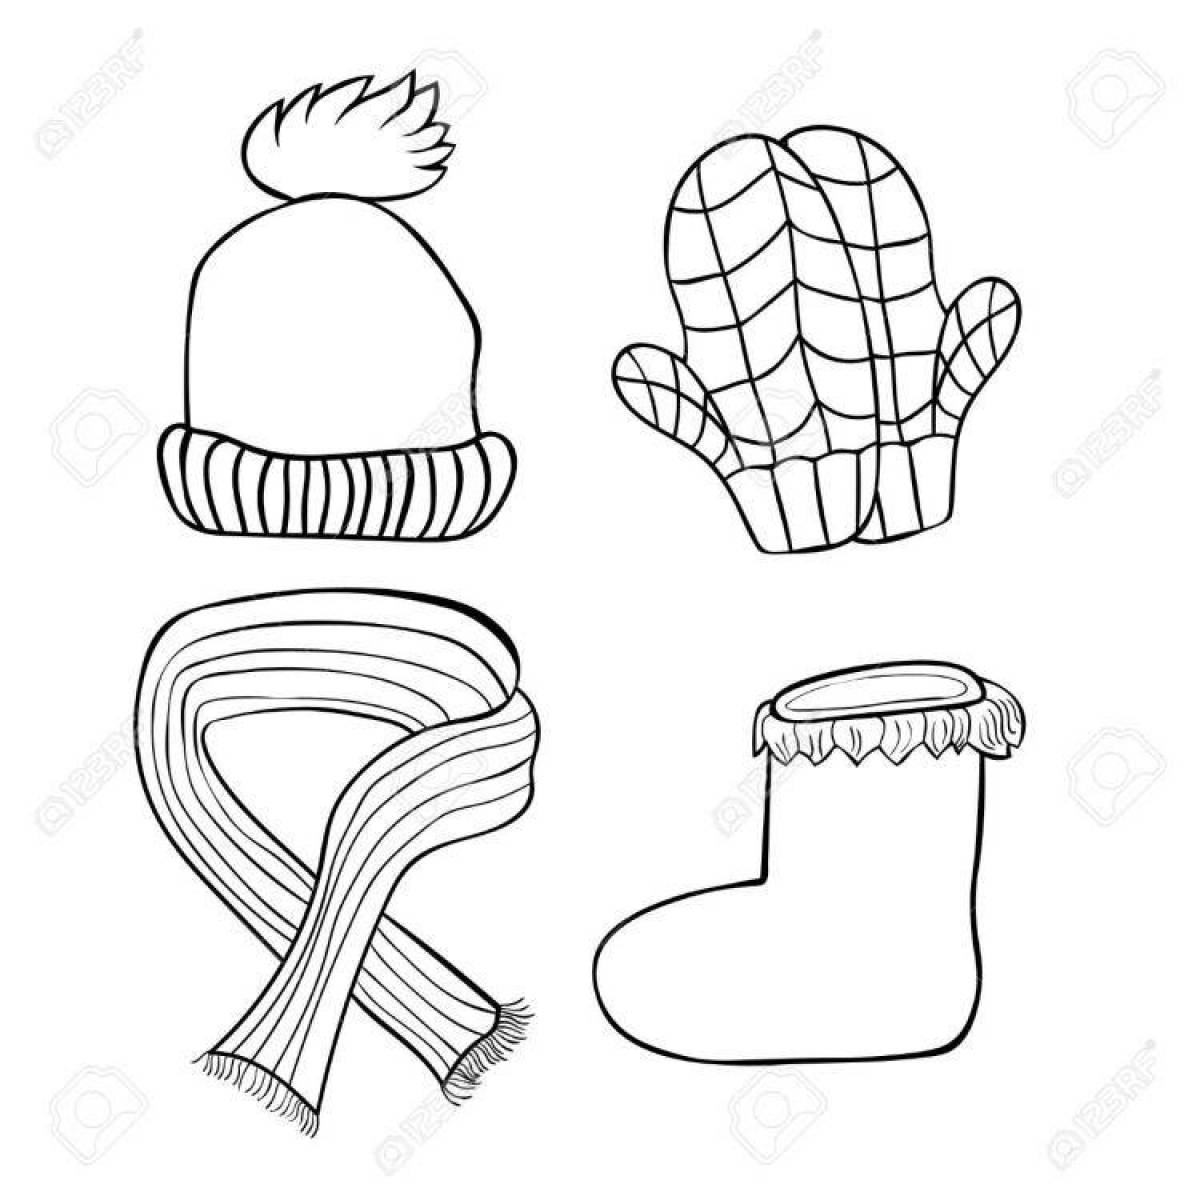 Colourful hat and mittens coloring page